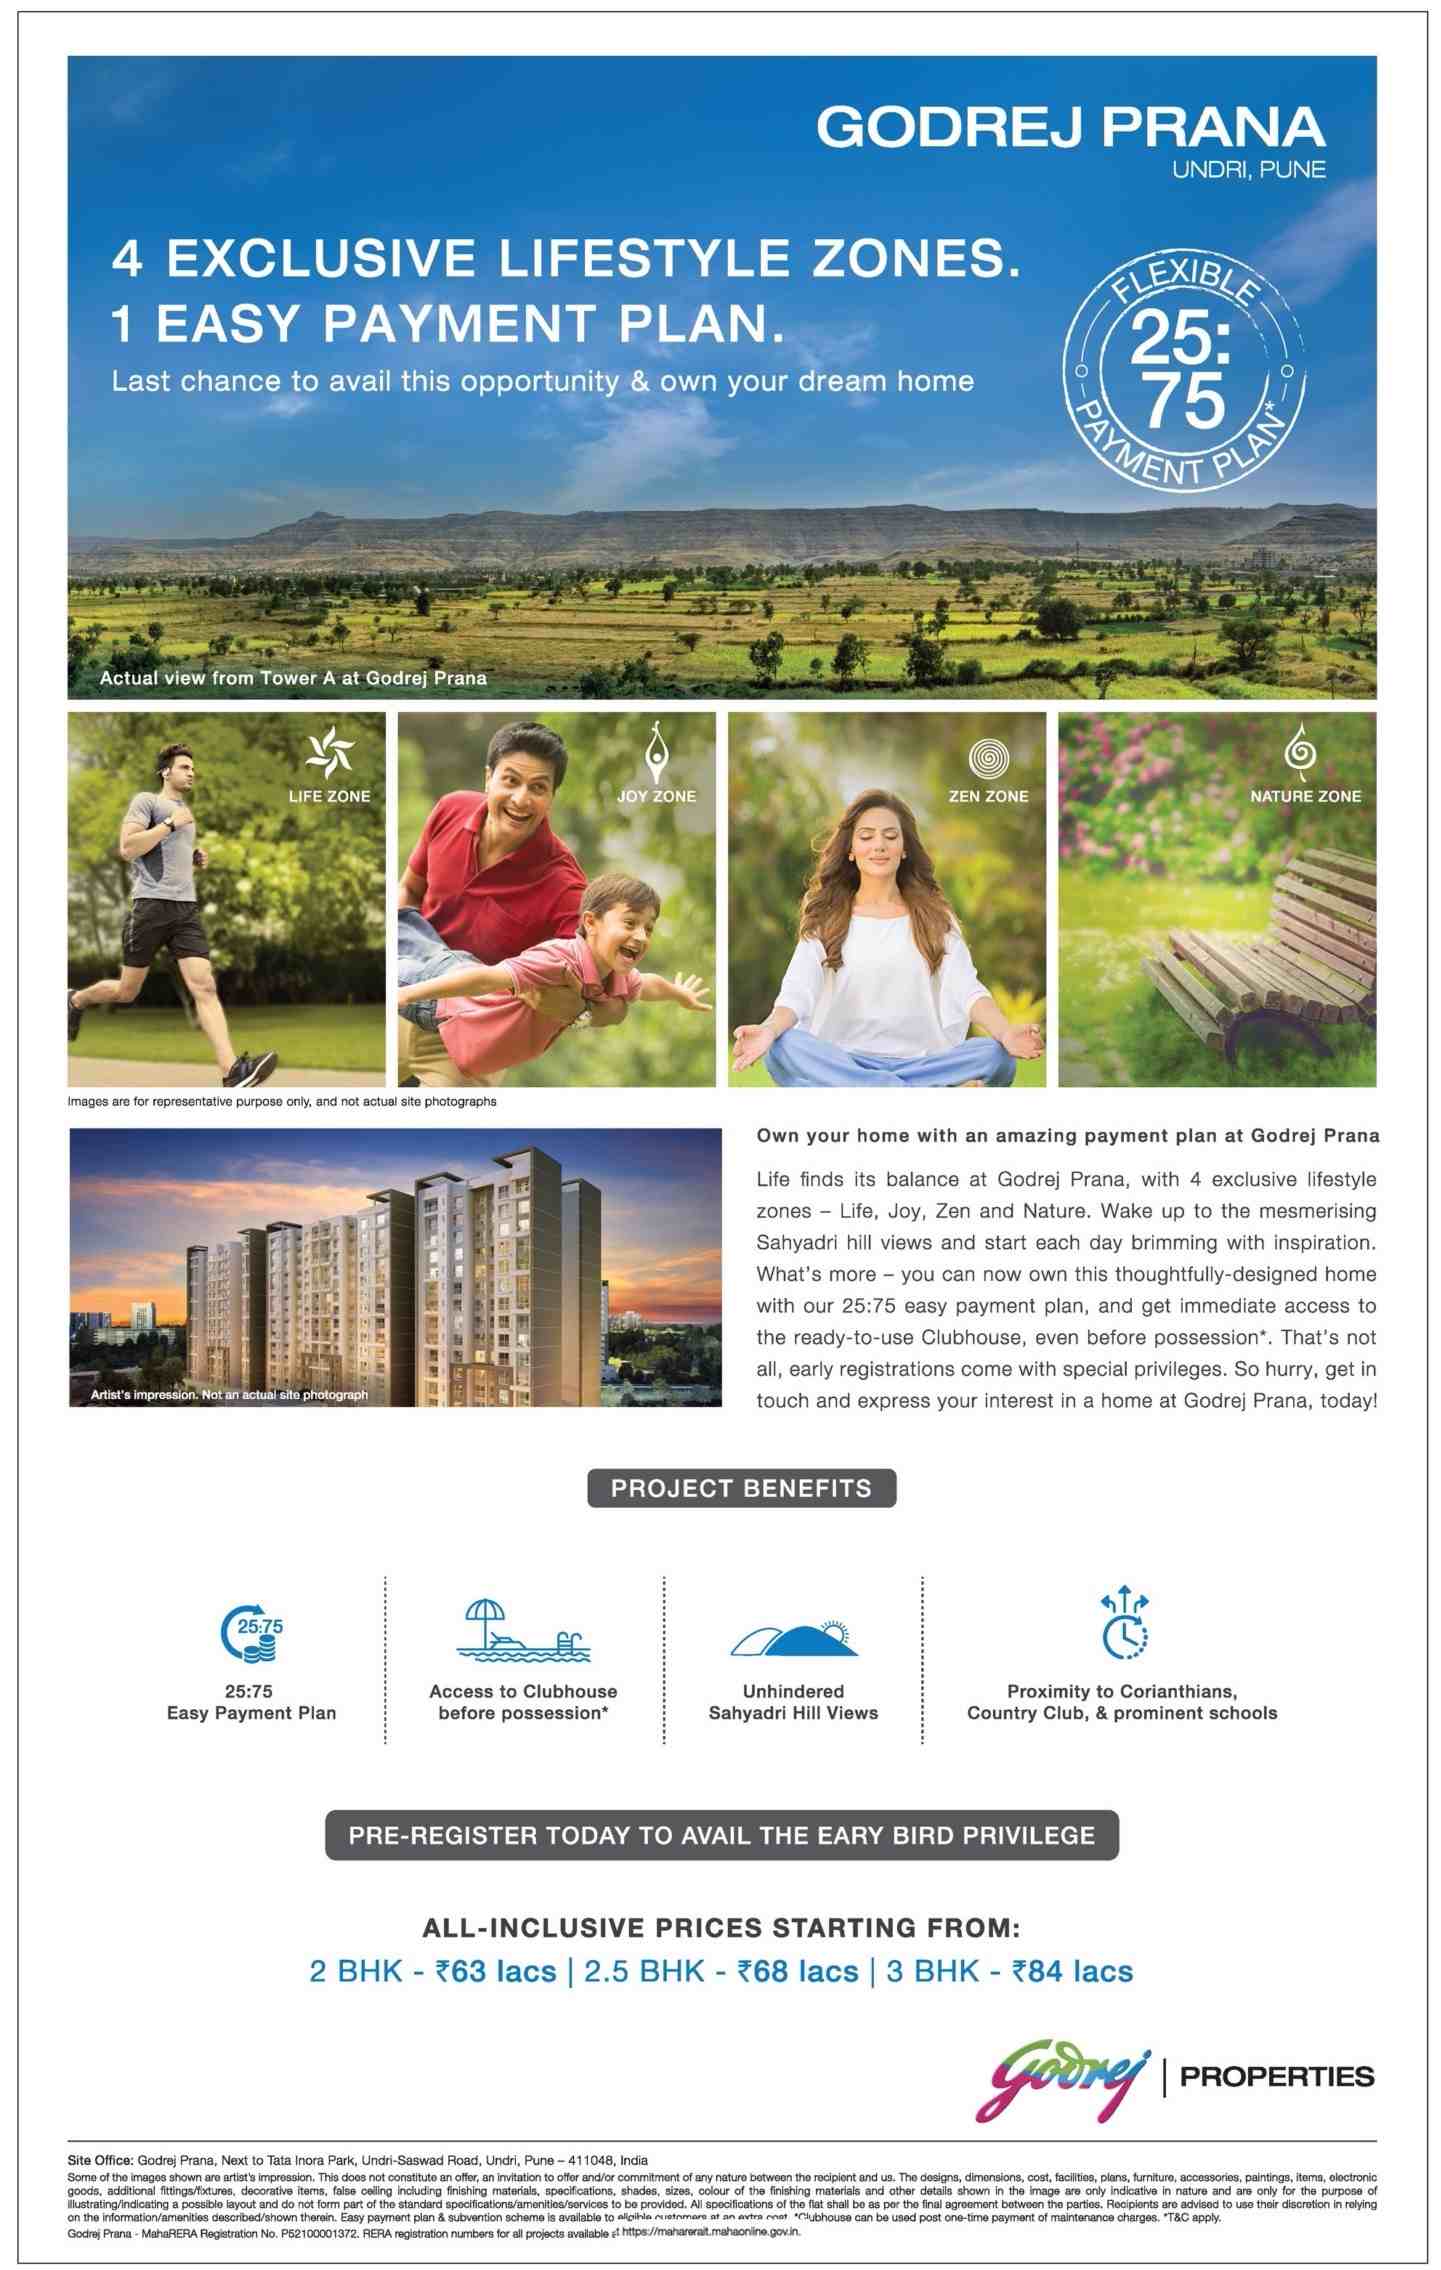 Own your home with an amazing payment plan at Godrej Prana in Pune Update